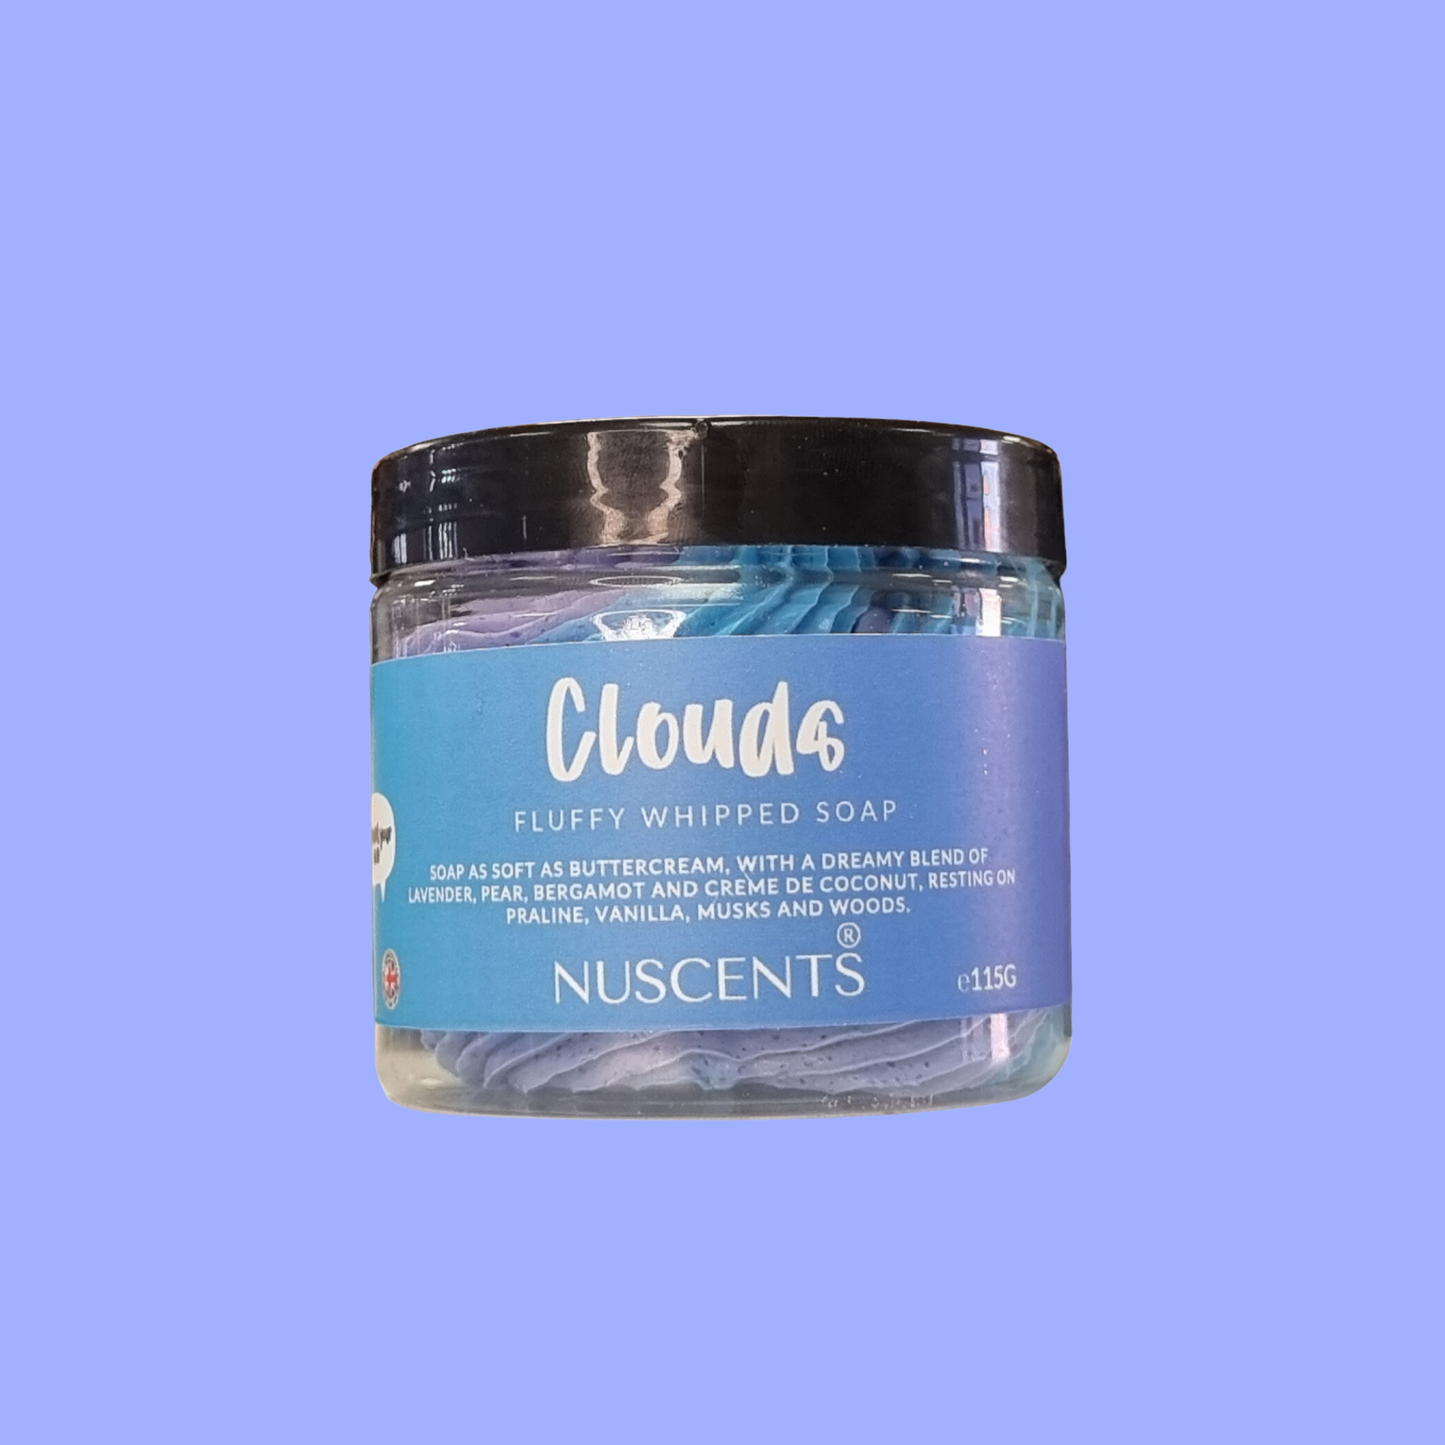 Clouds Whipped Soap